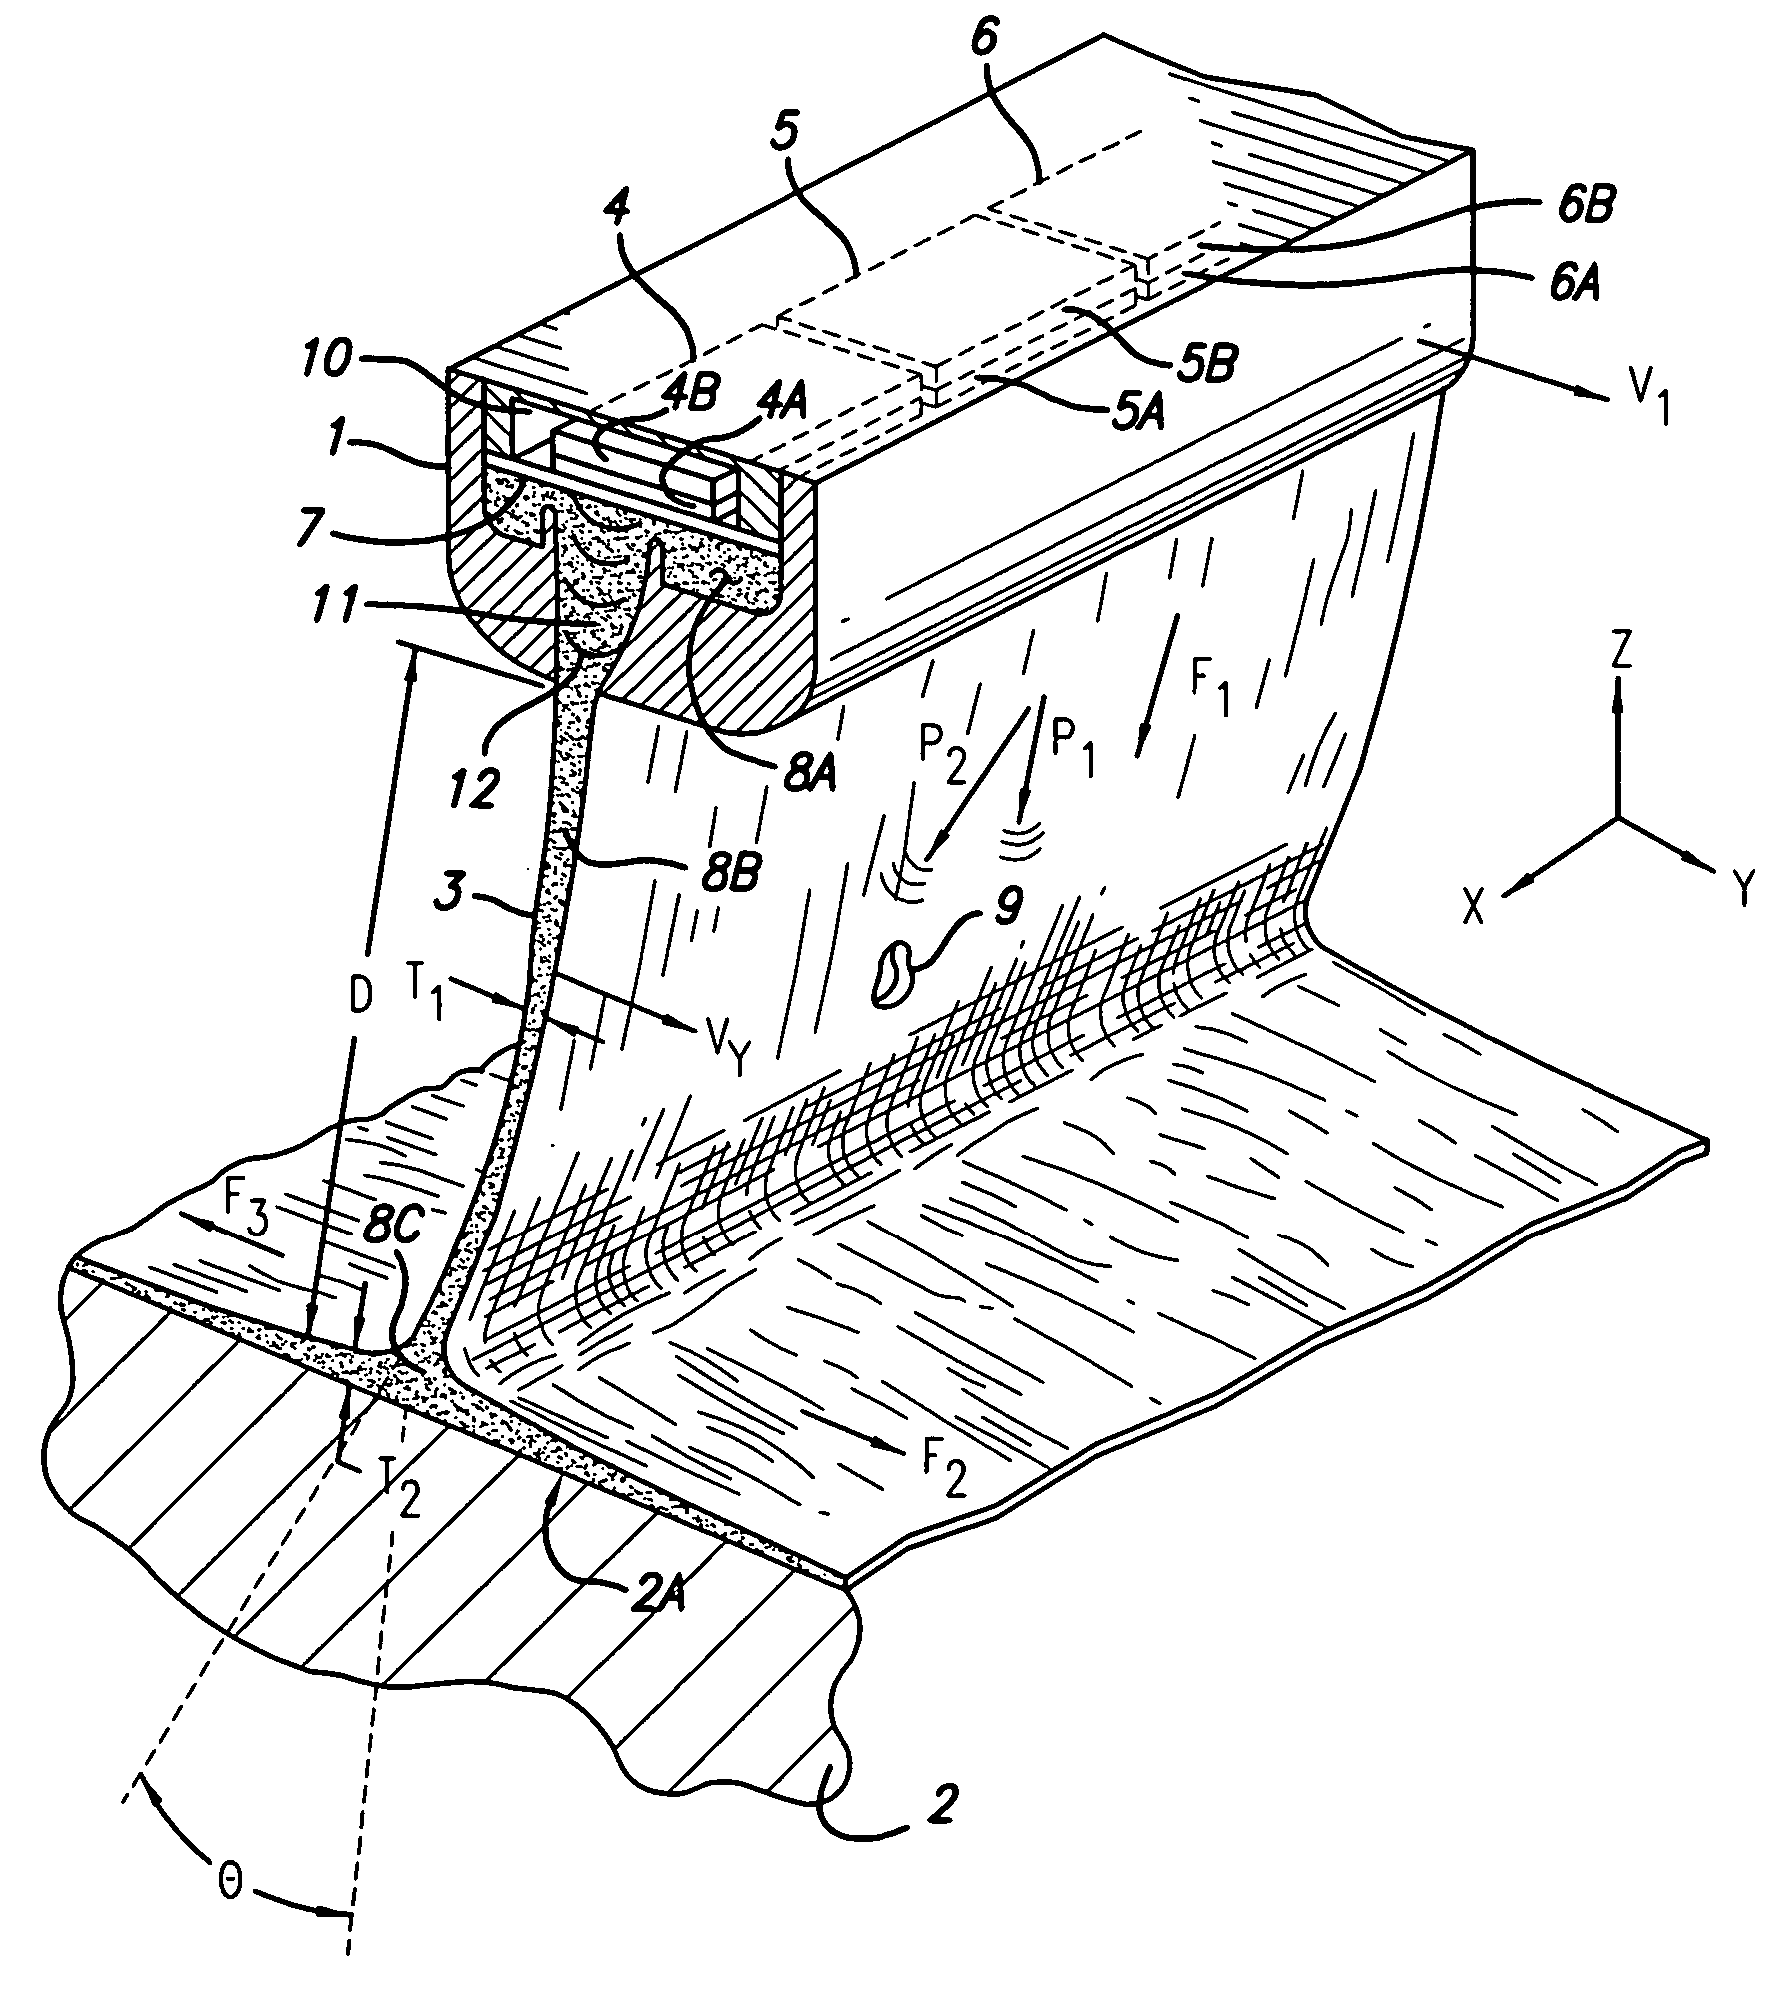 Apparatus and method for delivering acoustic energy through a liquid stream to a target object for disruptive surface cleaning or treating effects